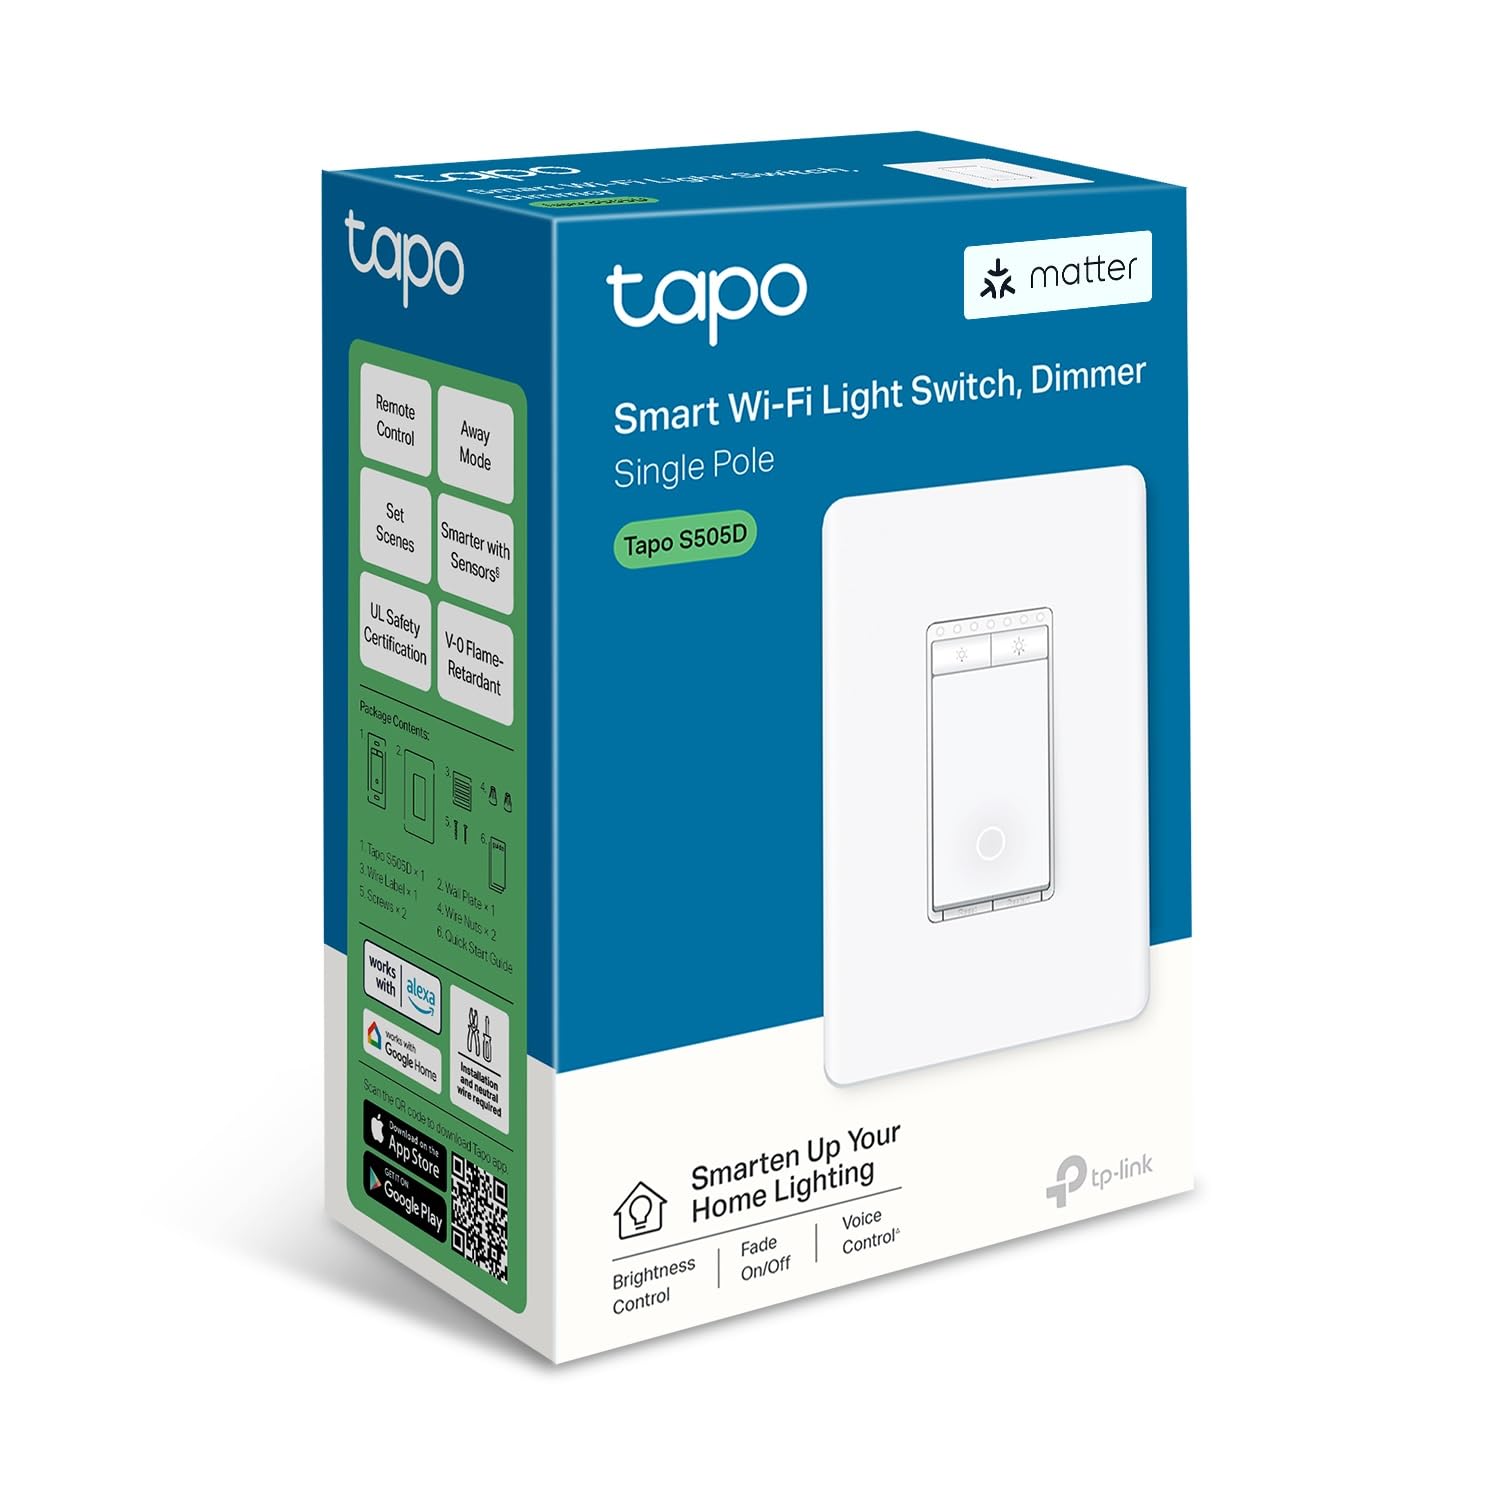 TP-Link Tapo Smart Wi-Fi Light Strip review: Mood changer - Can Buy or Not